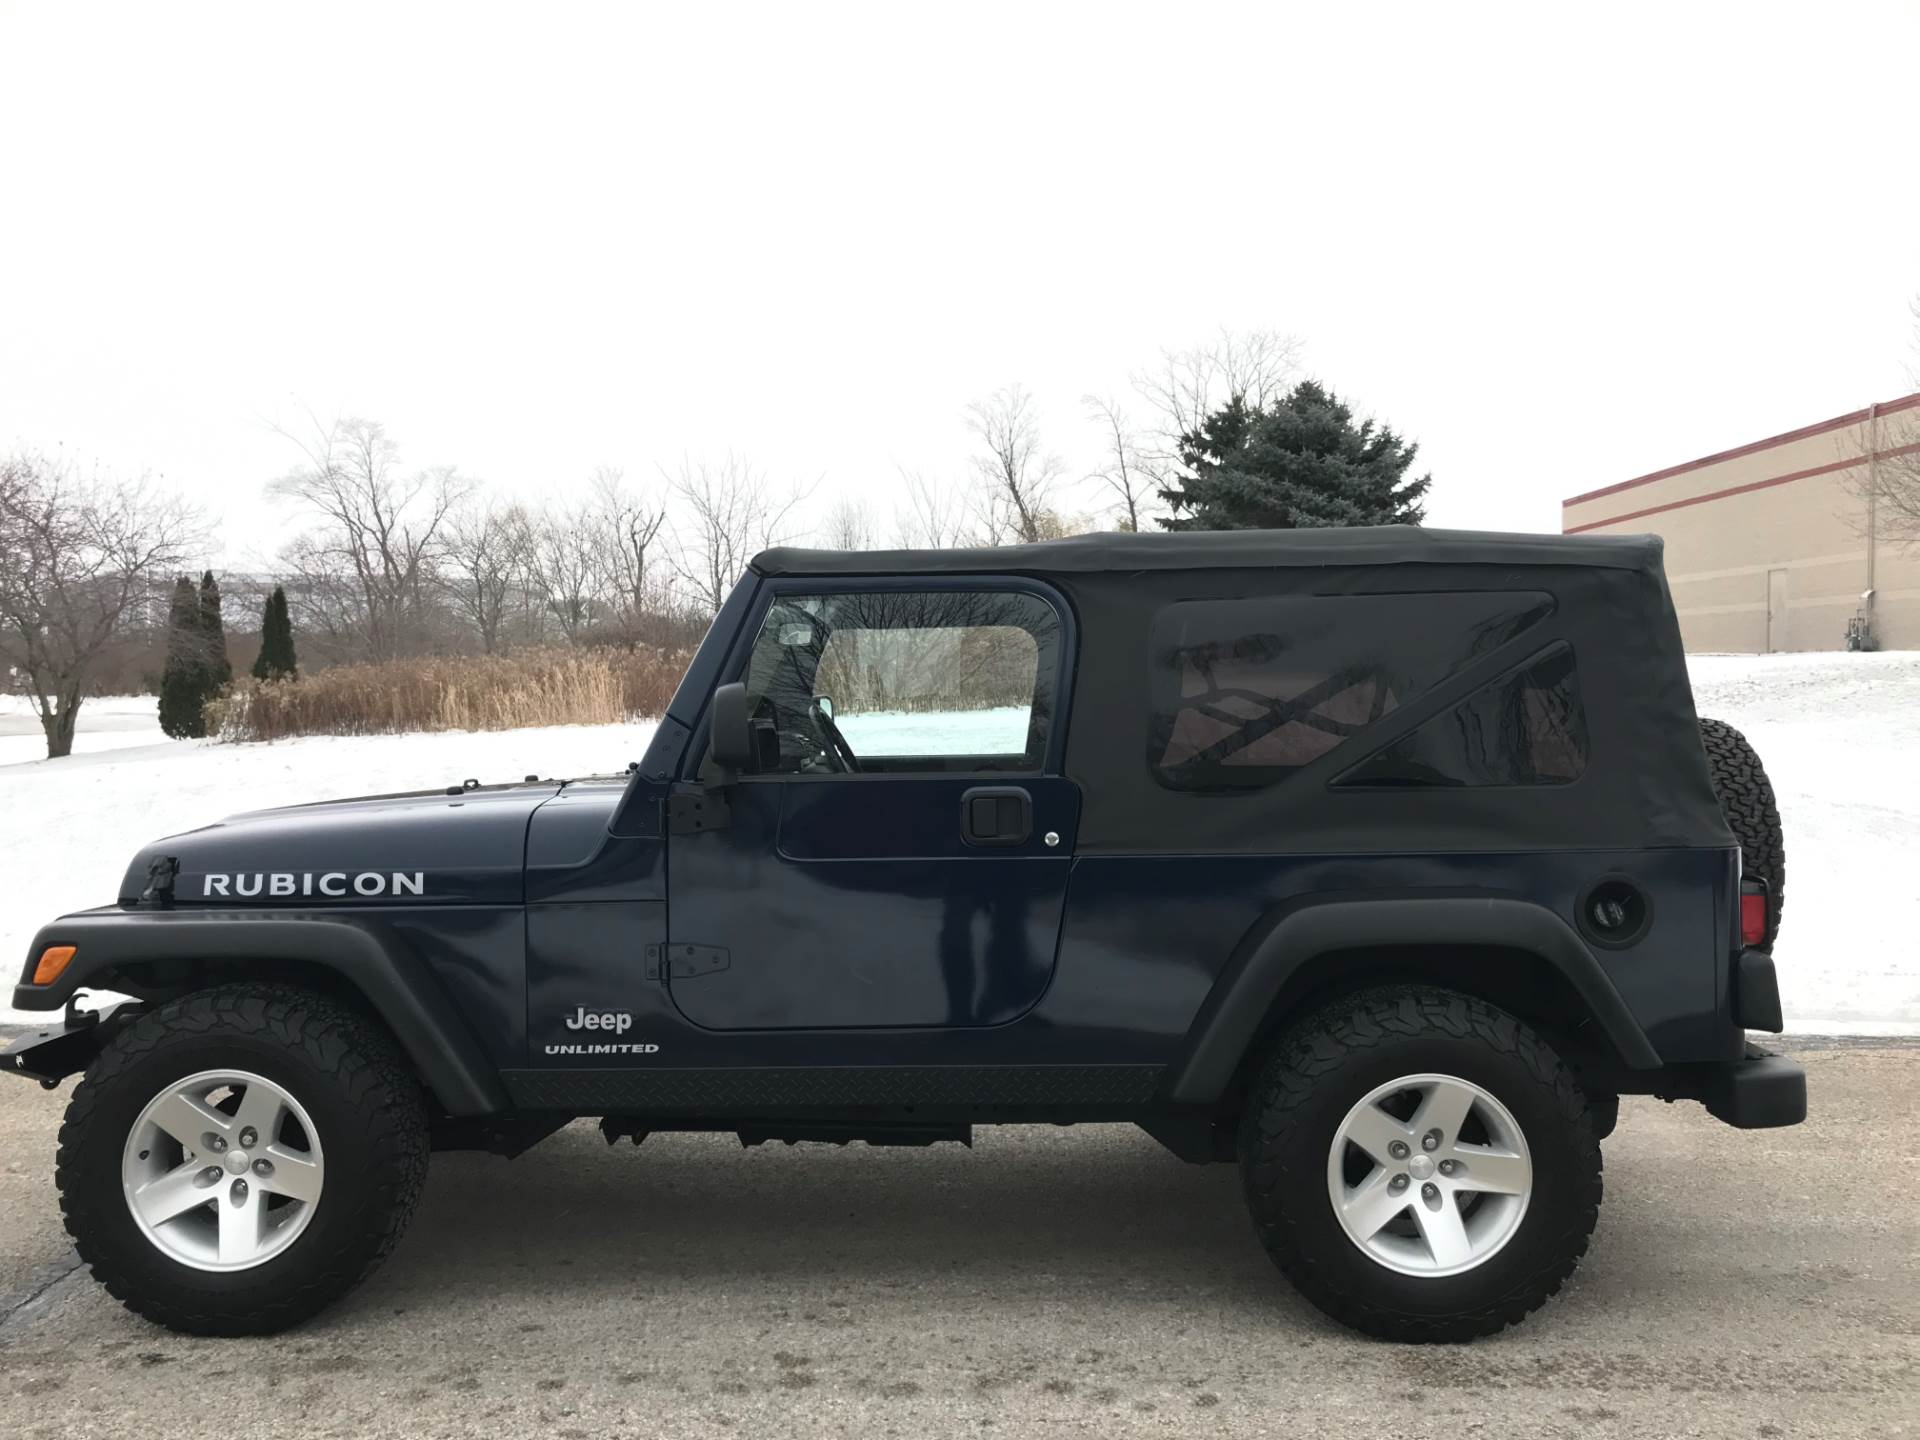 2006 Jeep Wrangler Unlimited Rubicon 2dr SUV 4WD in Big Bend, Wisconsin - Photo 112